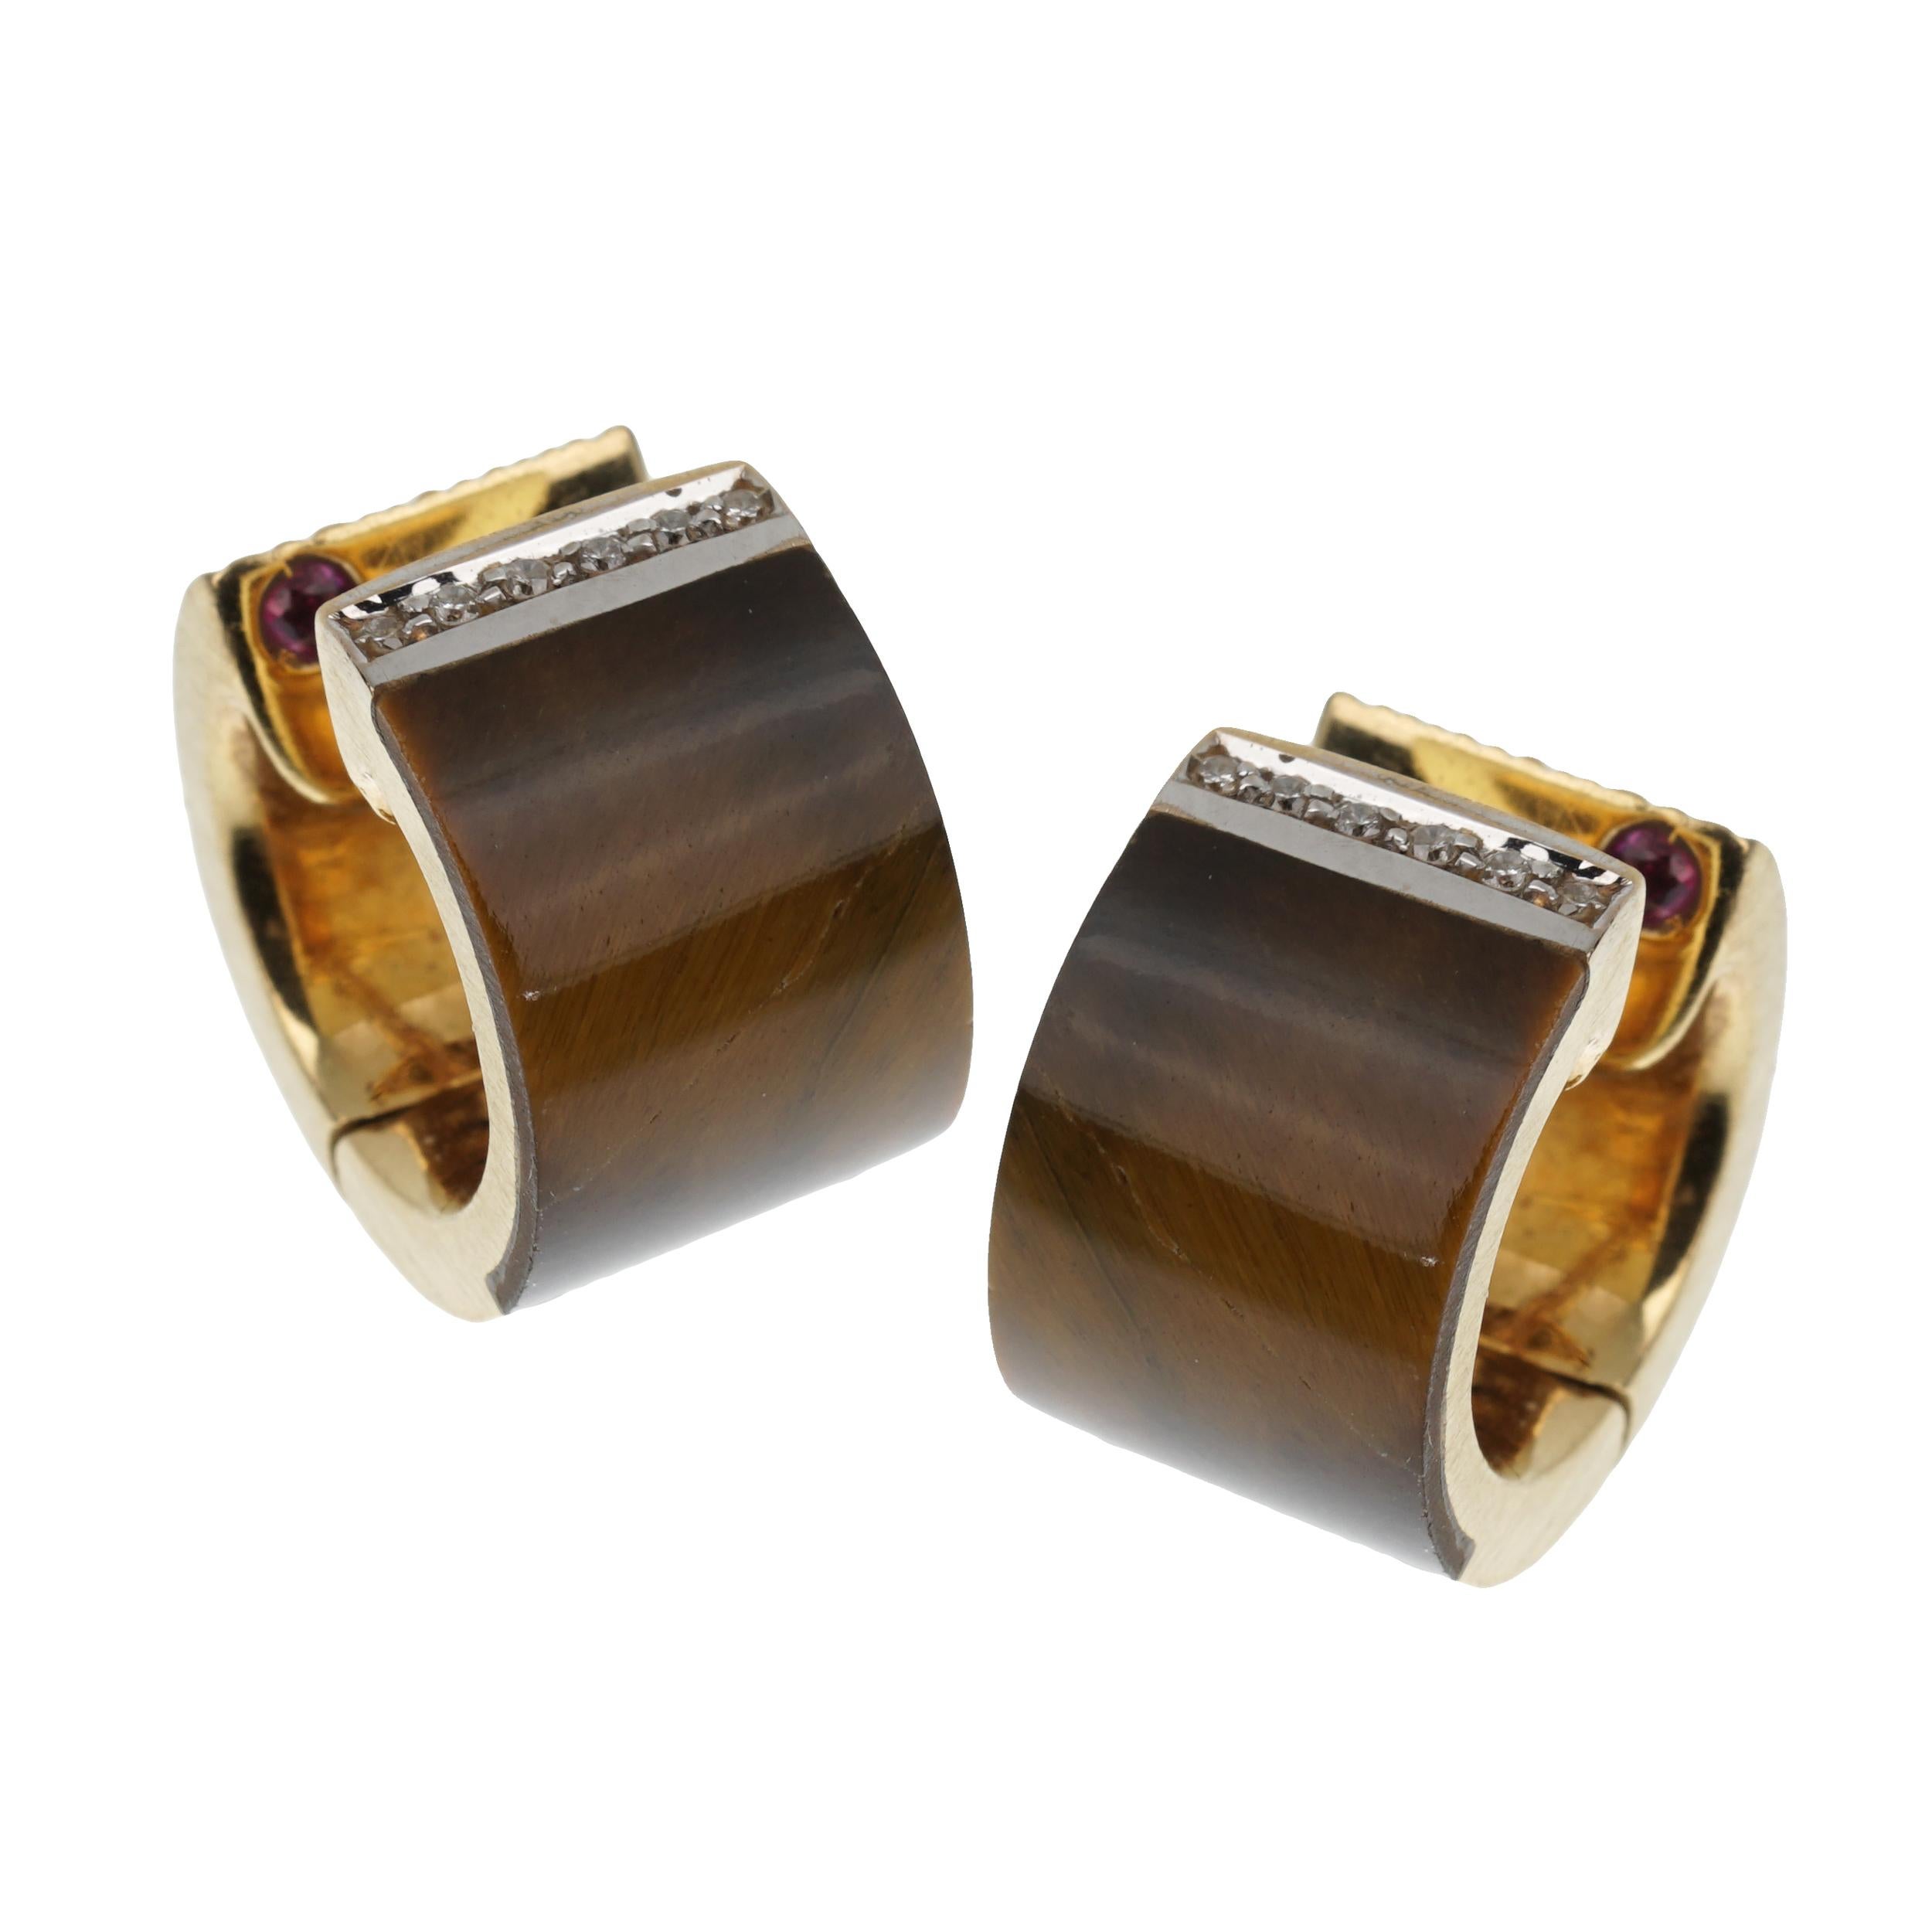 Roberto Coin Tiger Eye Vintage Diamond Gold Huggie Earrings that encapsulate the beauty of nature and the artistry of fine jewelry in one. These earrings are meticulously crafted to embody elegance and sophistication.

At the very pinnacle of each